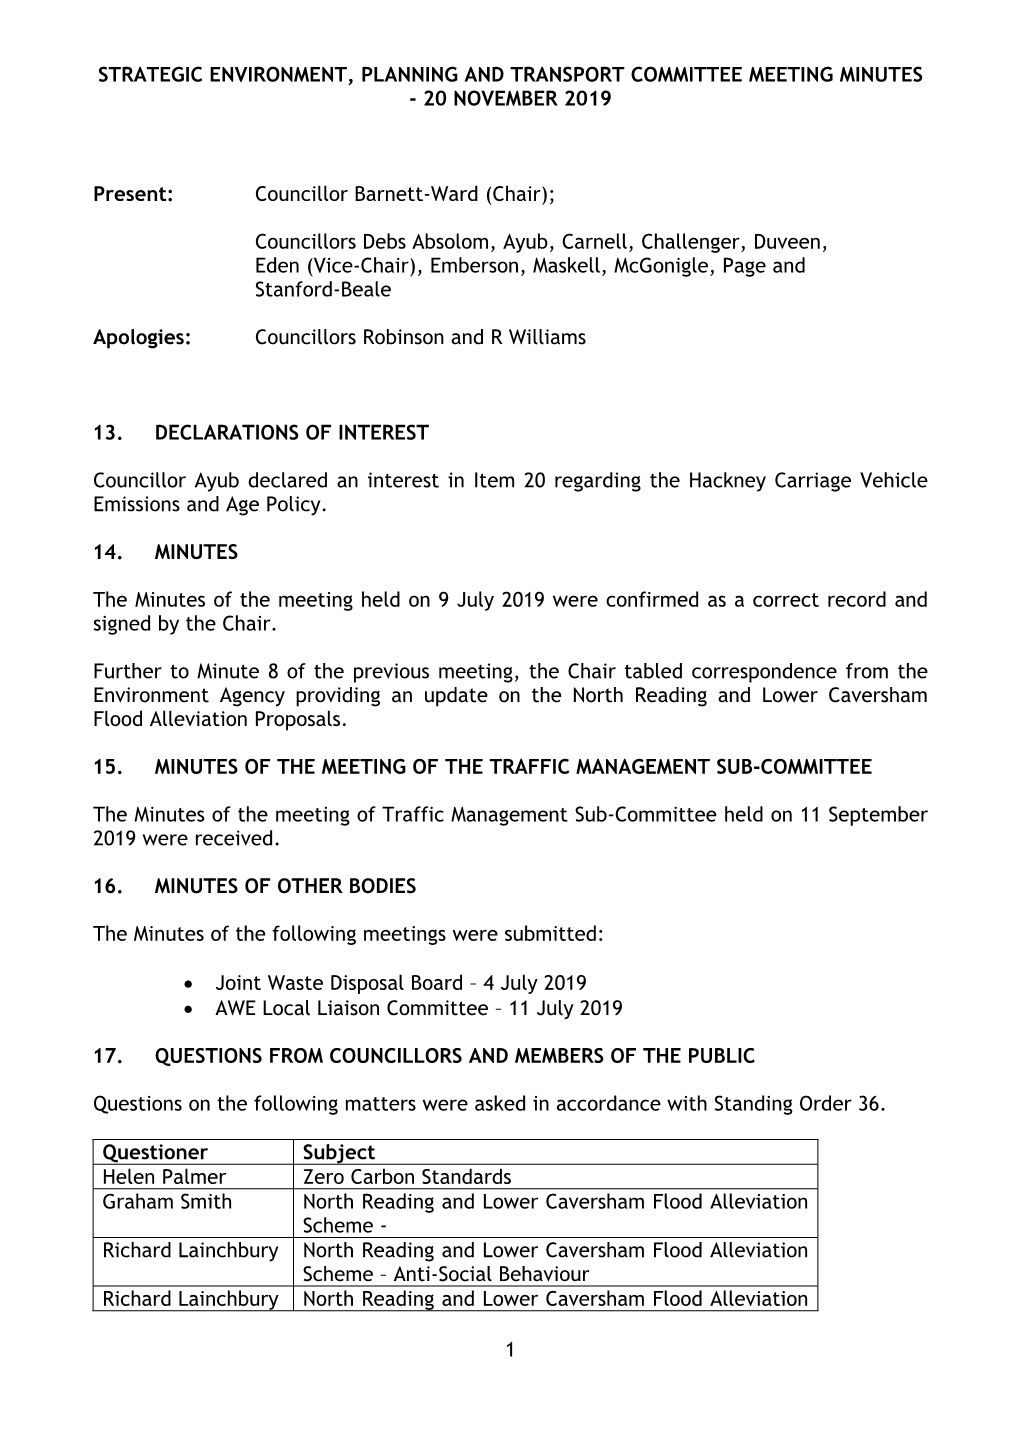 (Public Pack)Minutes Document for Strategic Environment, Planning and Transport Committee, 20/11/2019 18:30